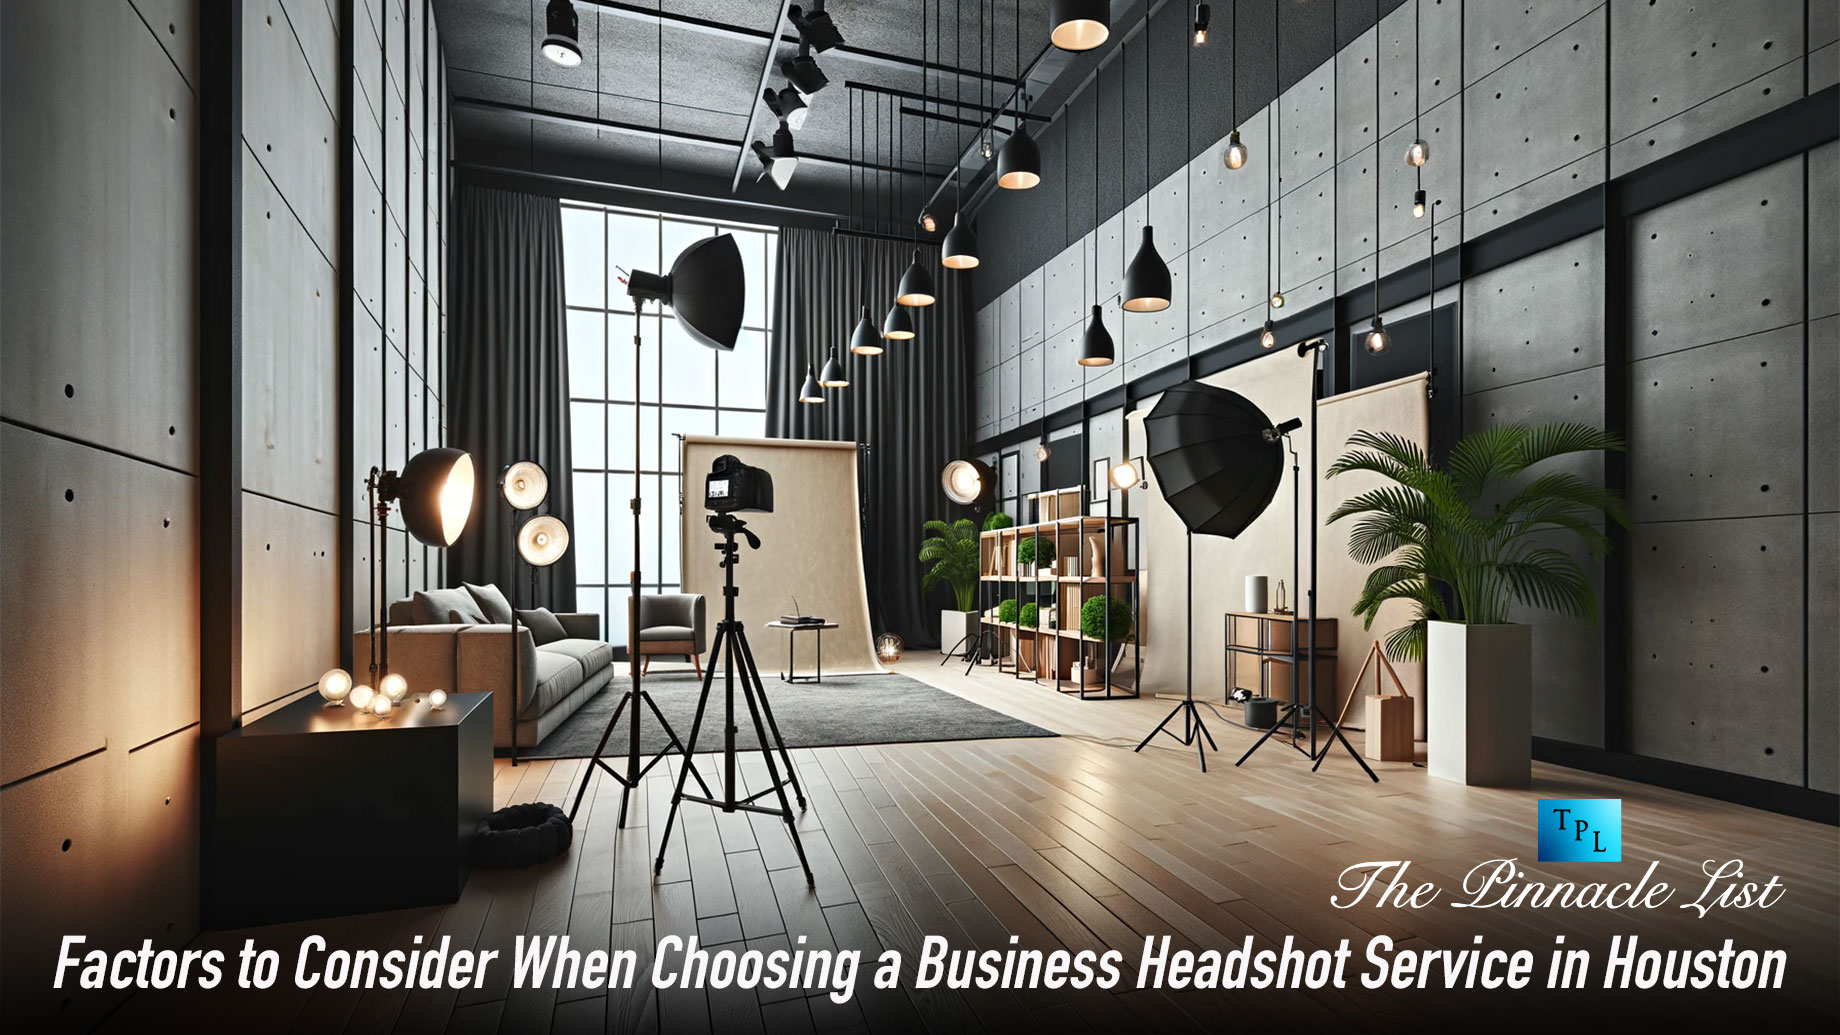 Factors to Consider When Choosing a Business Headshot Service in Houston